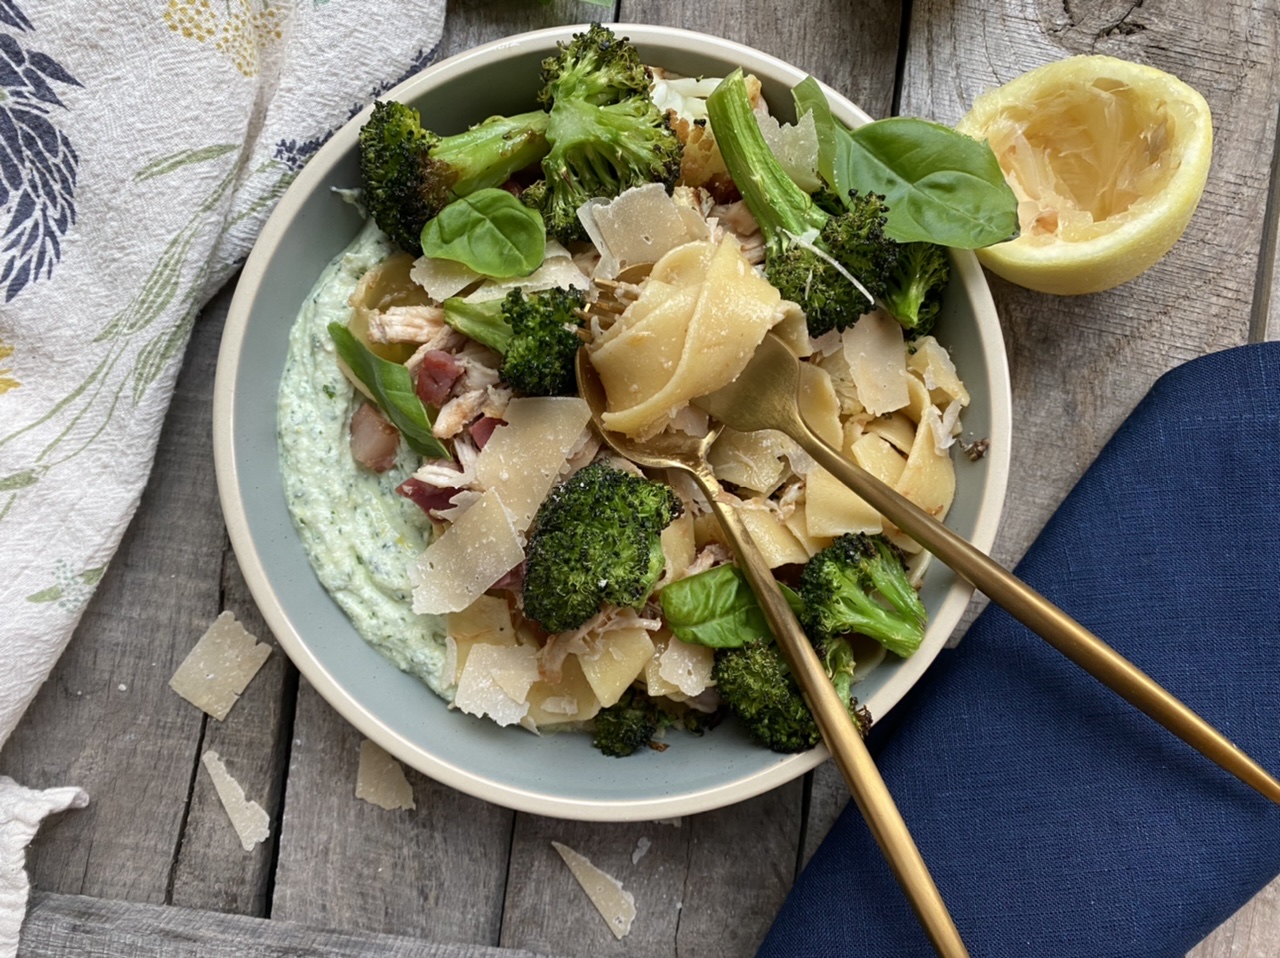 6457A015 DAD8 4BBC 876C A0147873CEDB - Browned Butter Pappardelle Chicken with Pancetta & Roast Broccoli on Herbed Whipped Ricotta